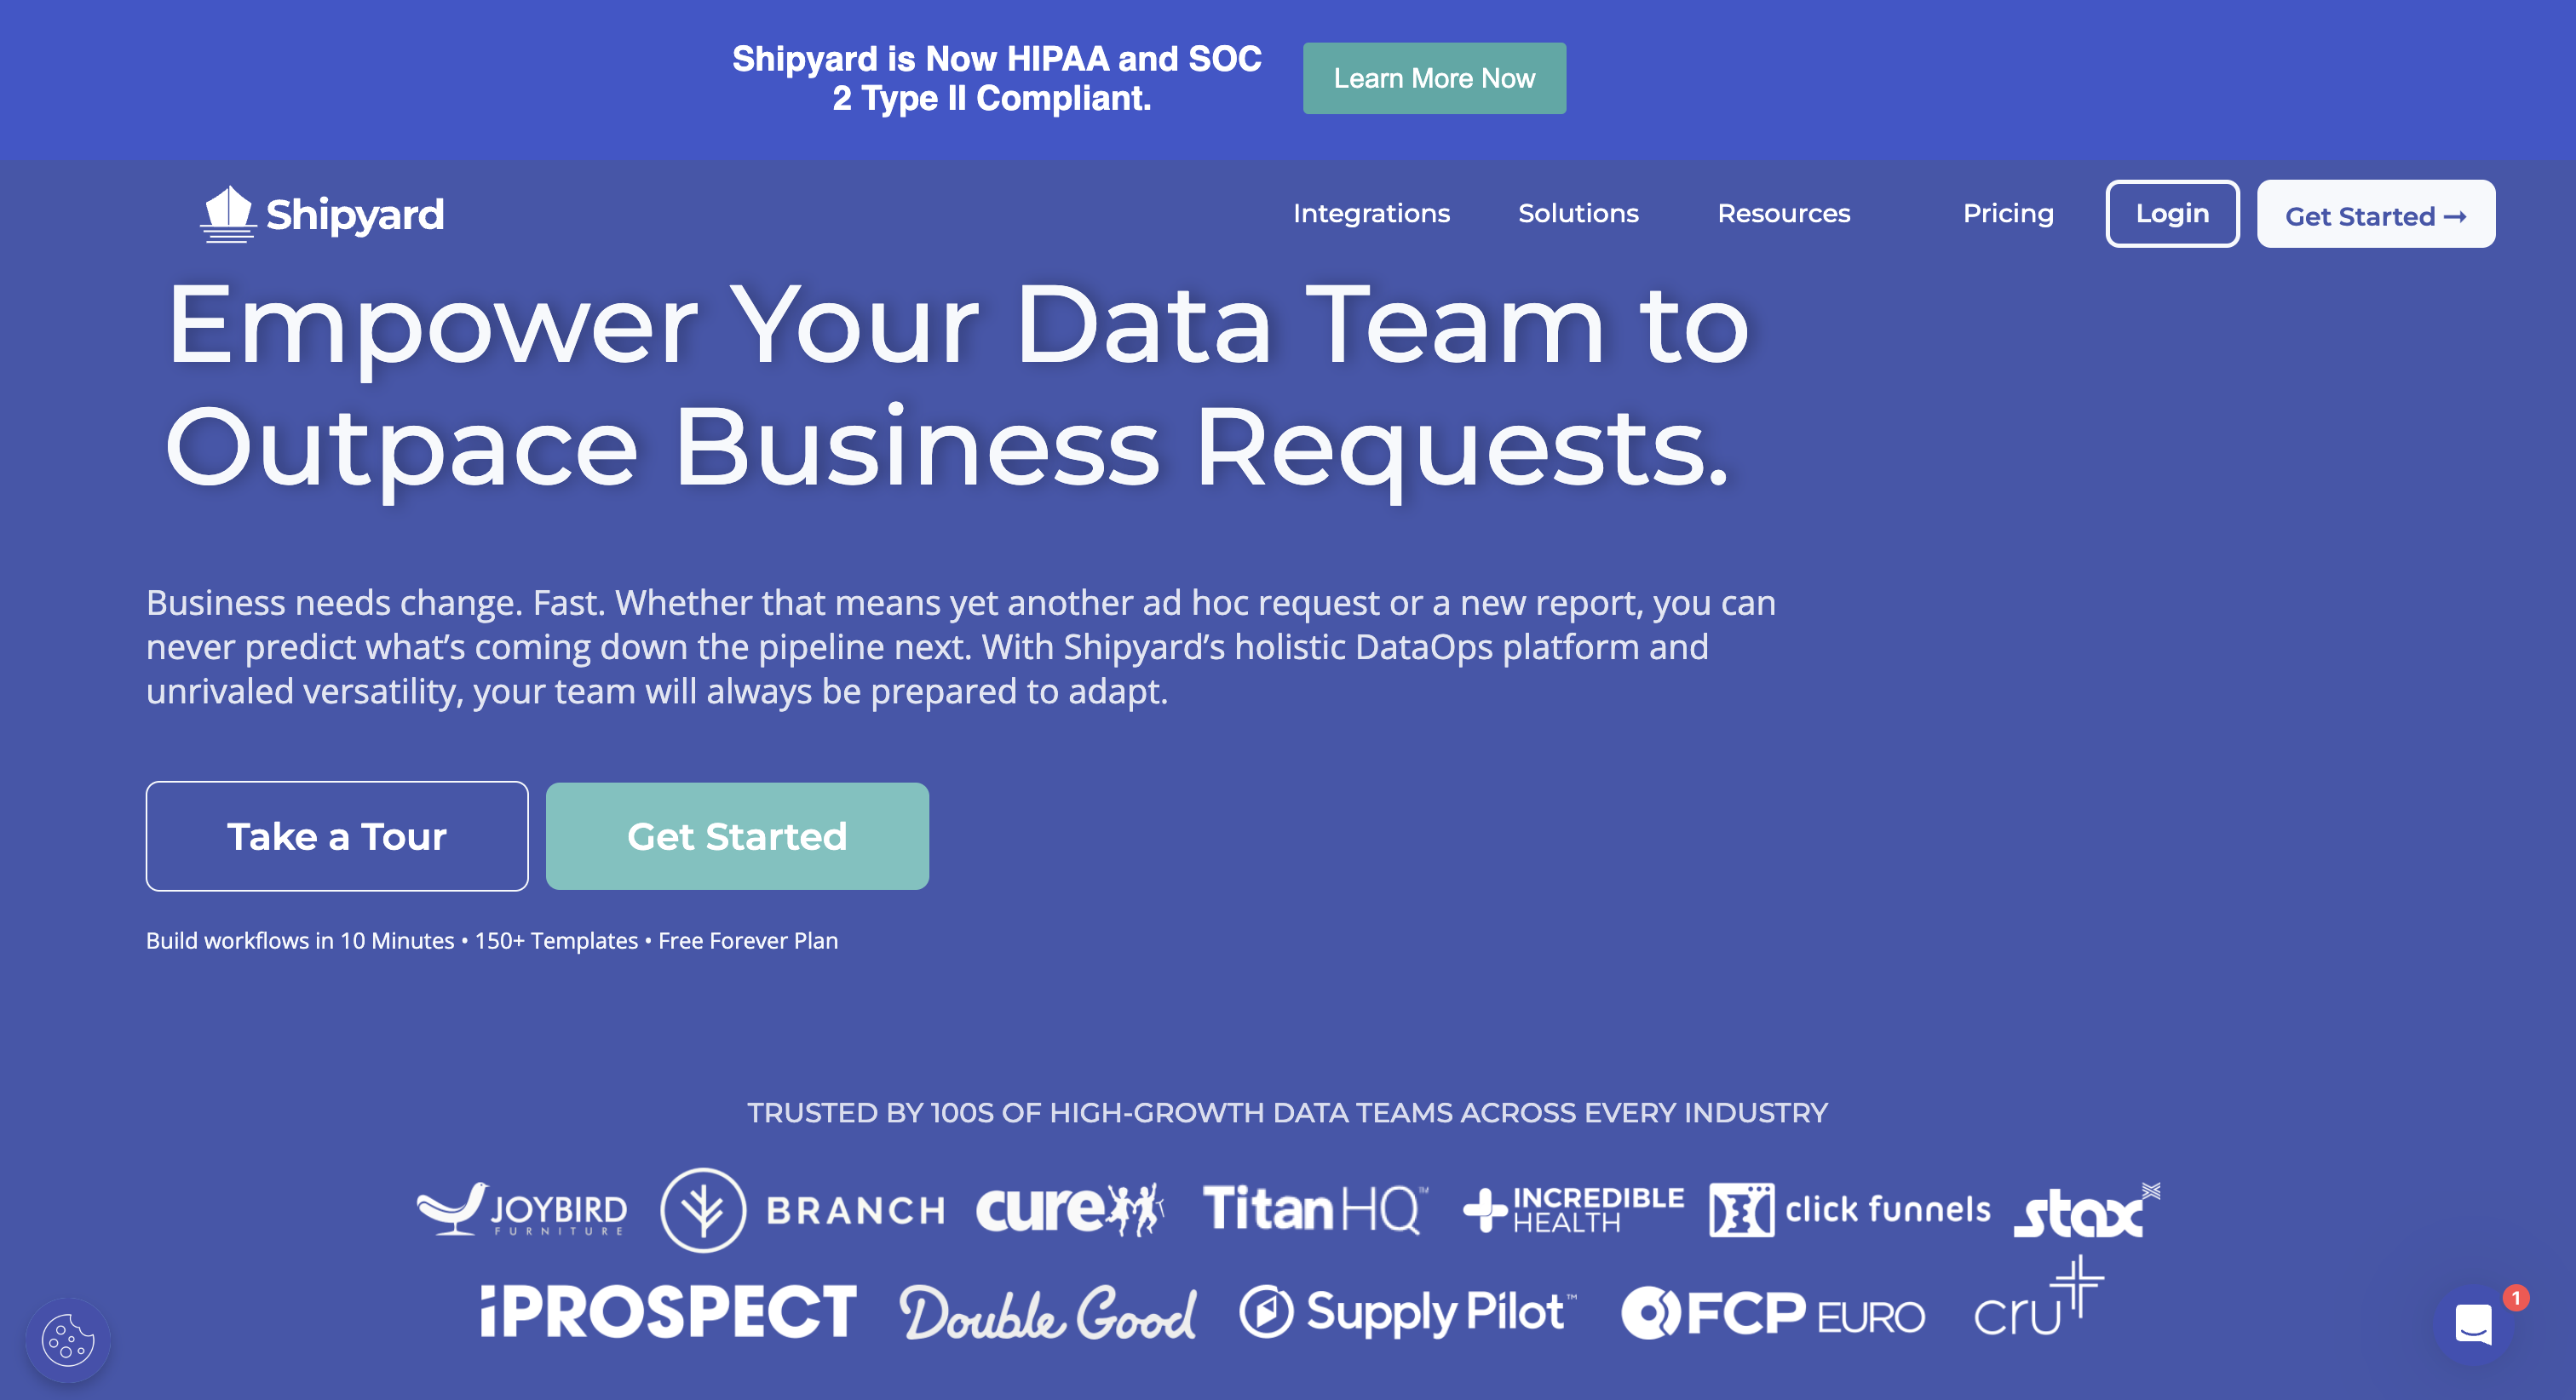 Shipyard Empower Your Data Team to Outpace Business Requests